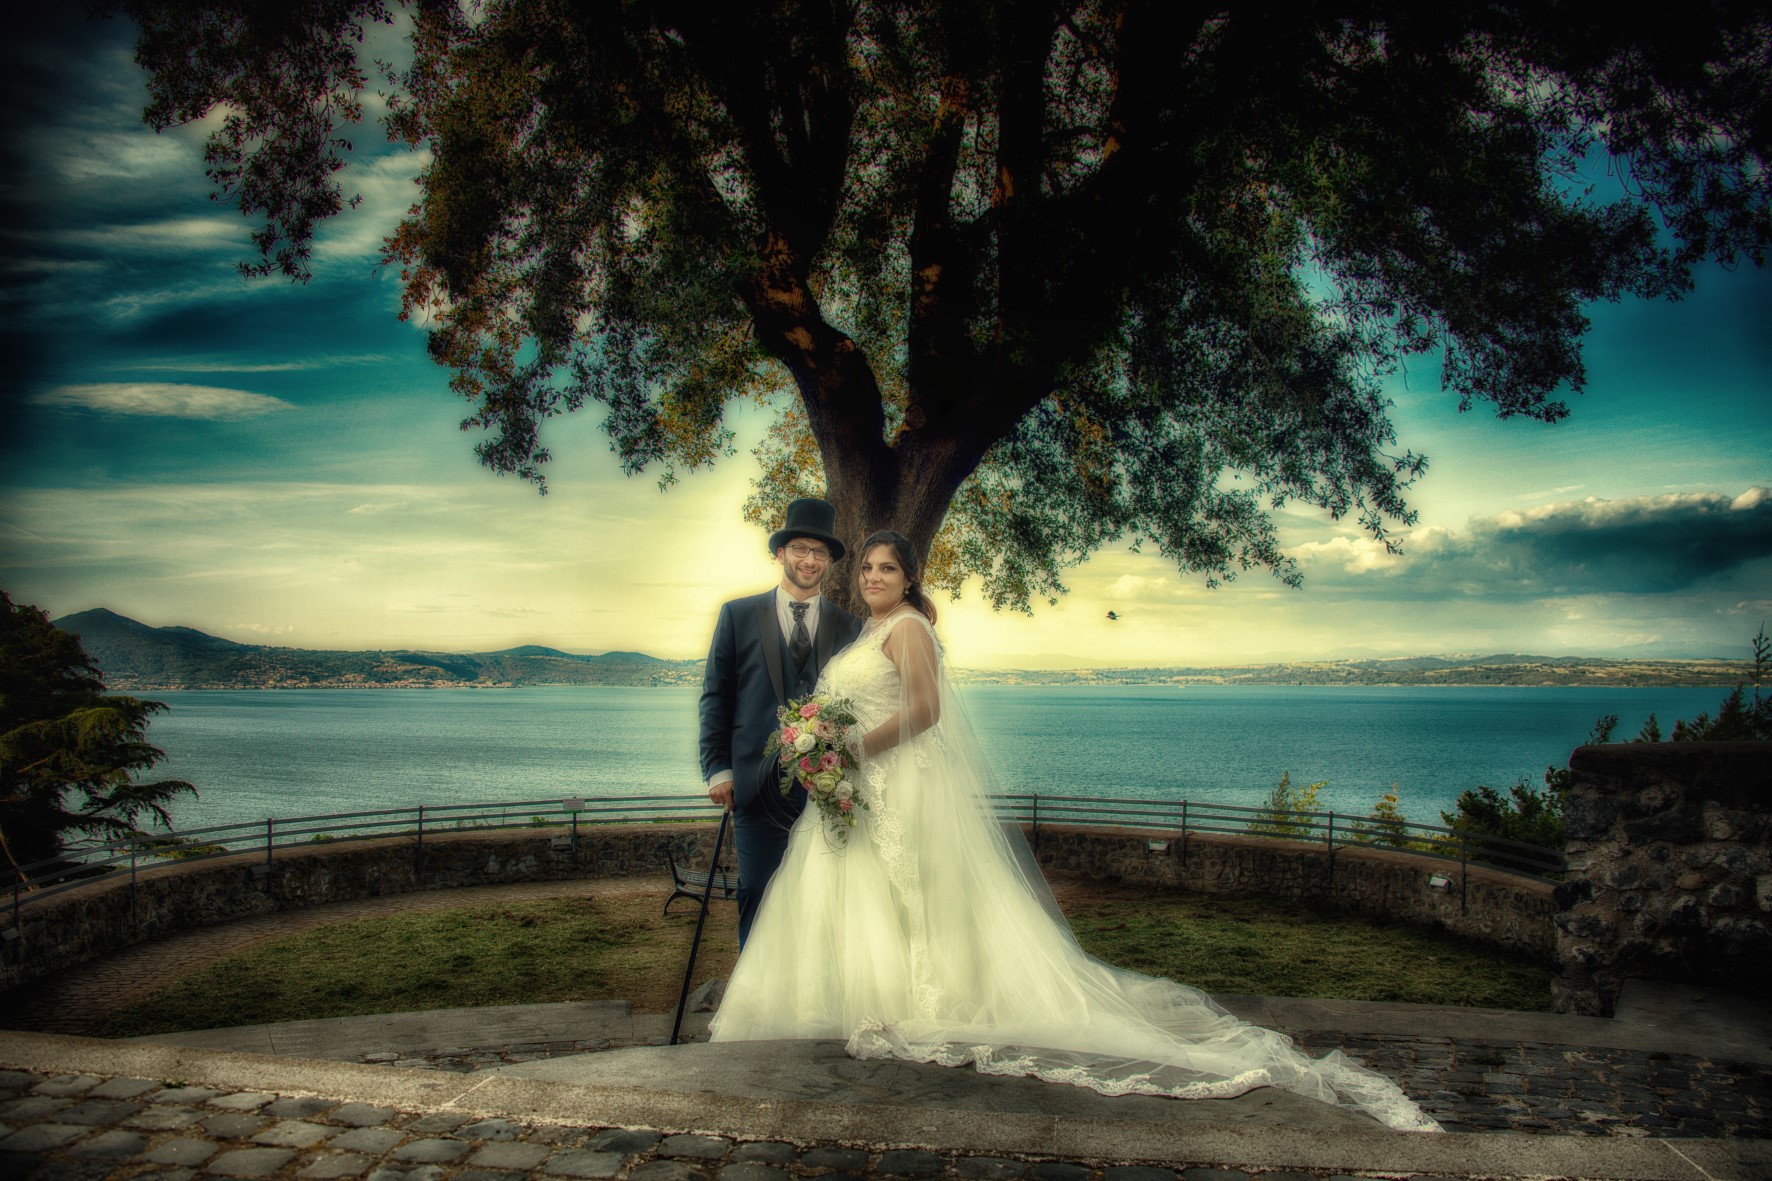 Photography & Project by fototrogu.com